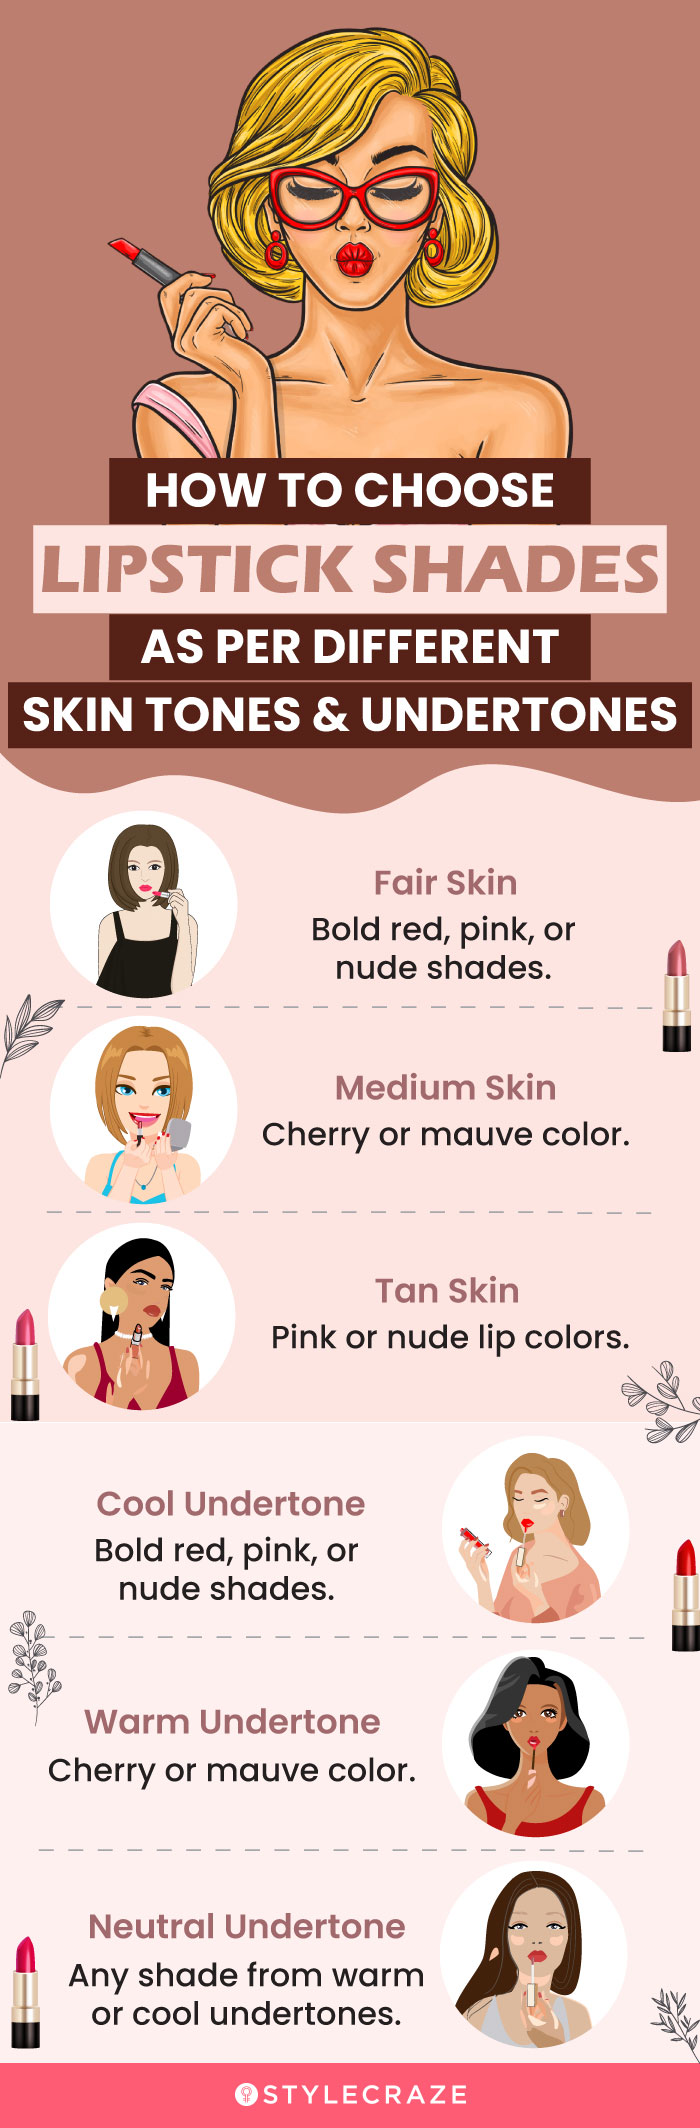 How To Choose Lipstick Shades As Per Different Skin Tones (infographic)